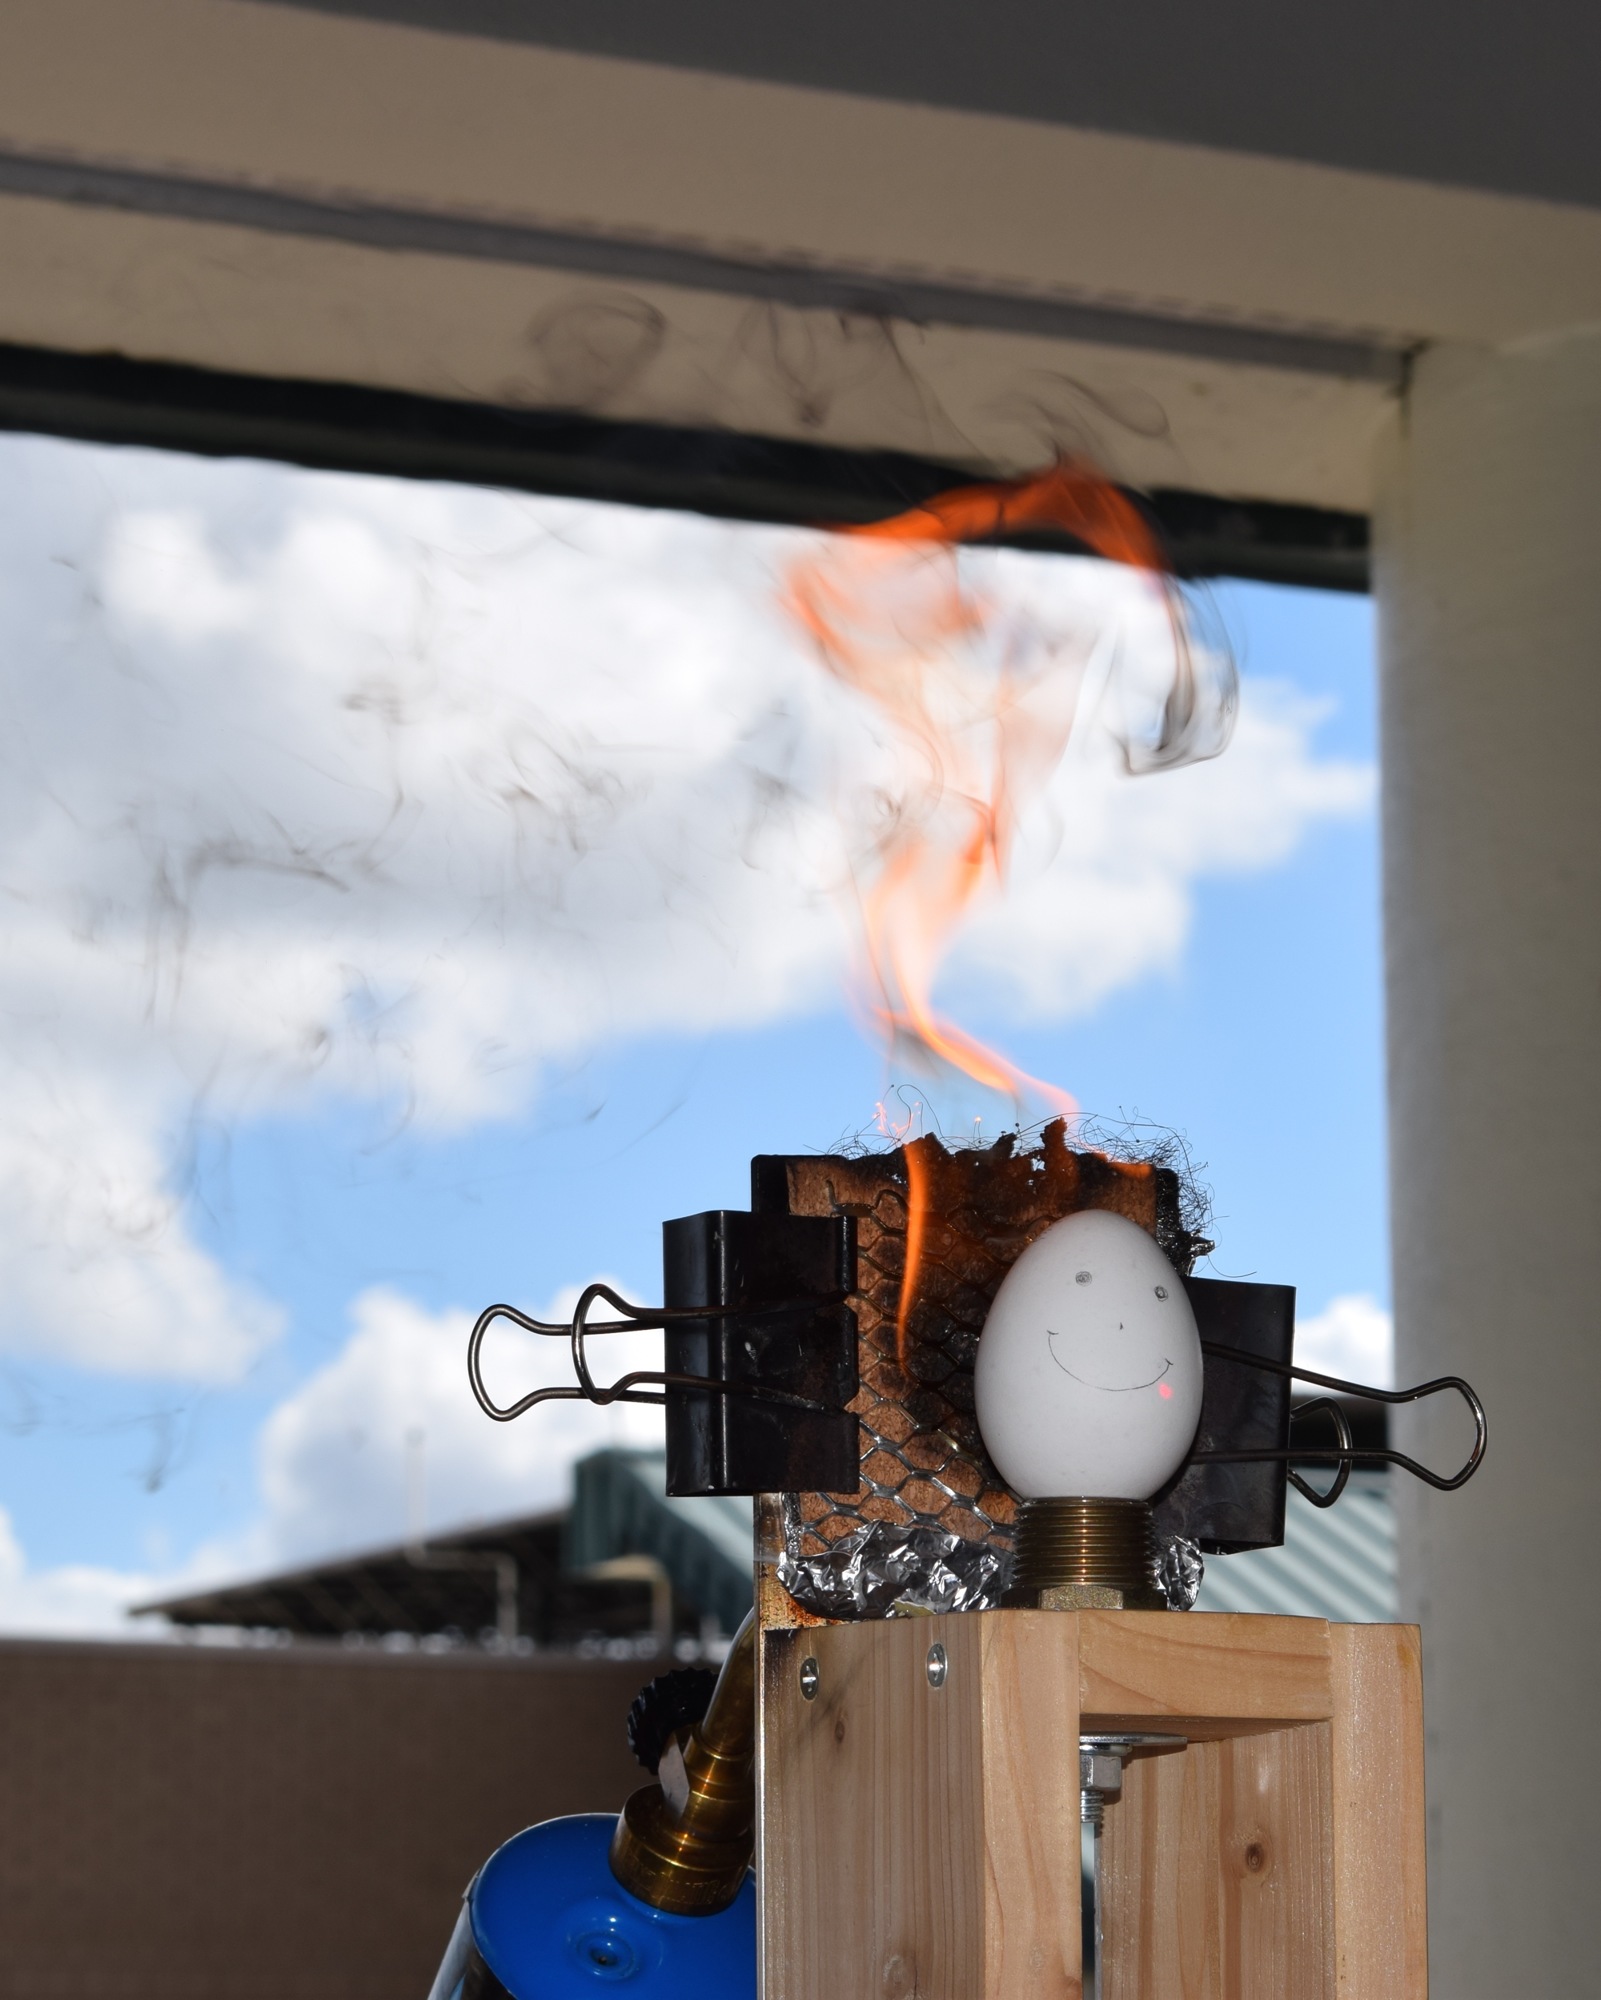 A group's shield catches fire during its five minutes under intense heat. The egg was only slightly cooked at the end of testing.